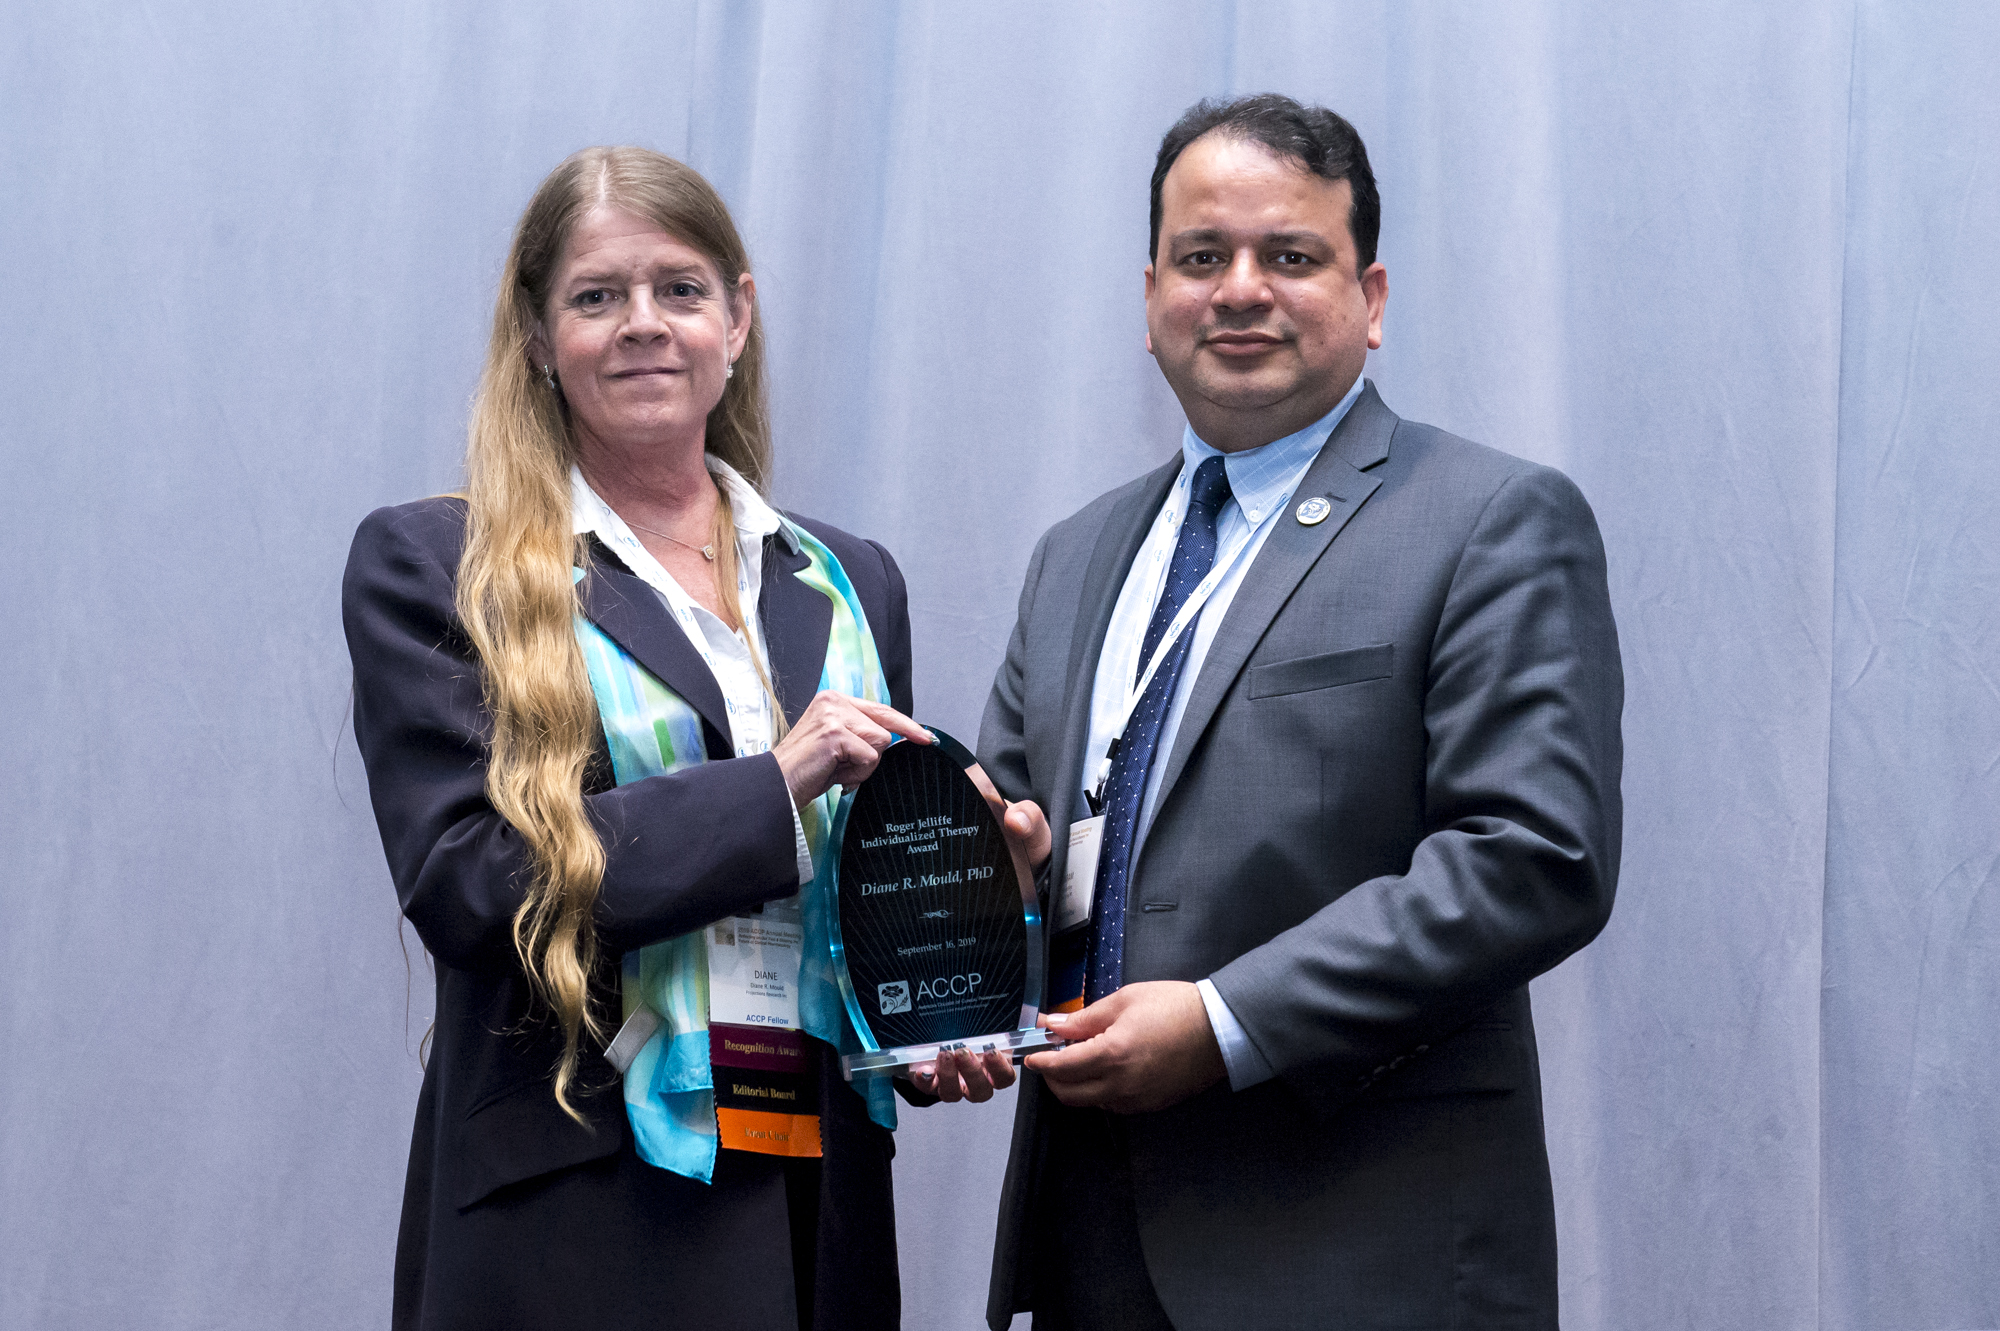 Dr. Diane R. Mould receives the    Roger Jelliffe Individualized Therapy Award